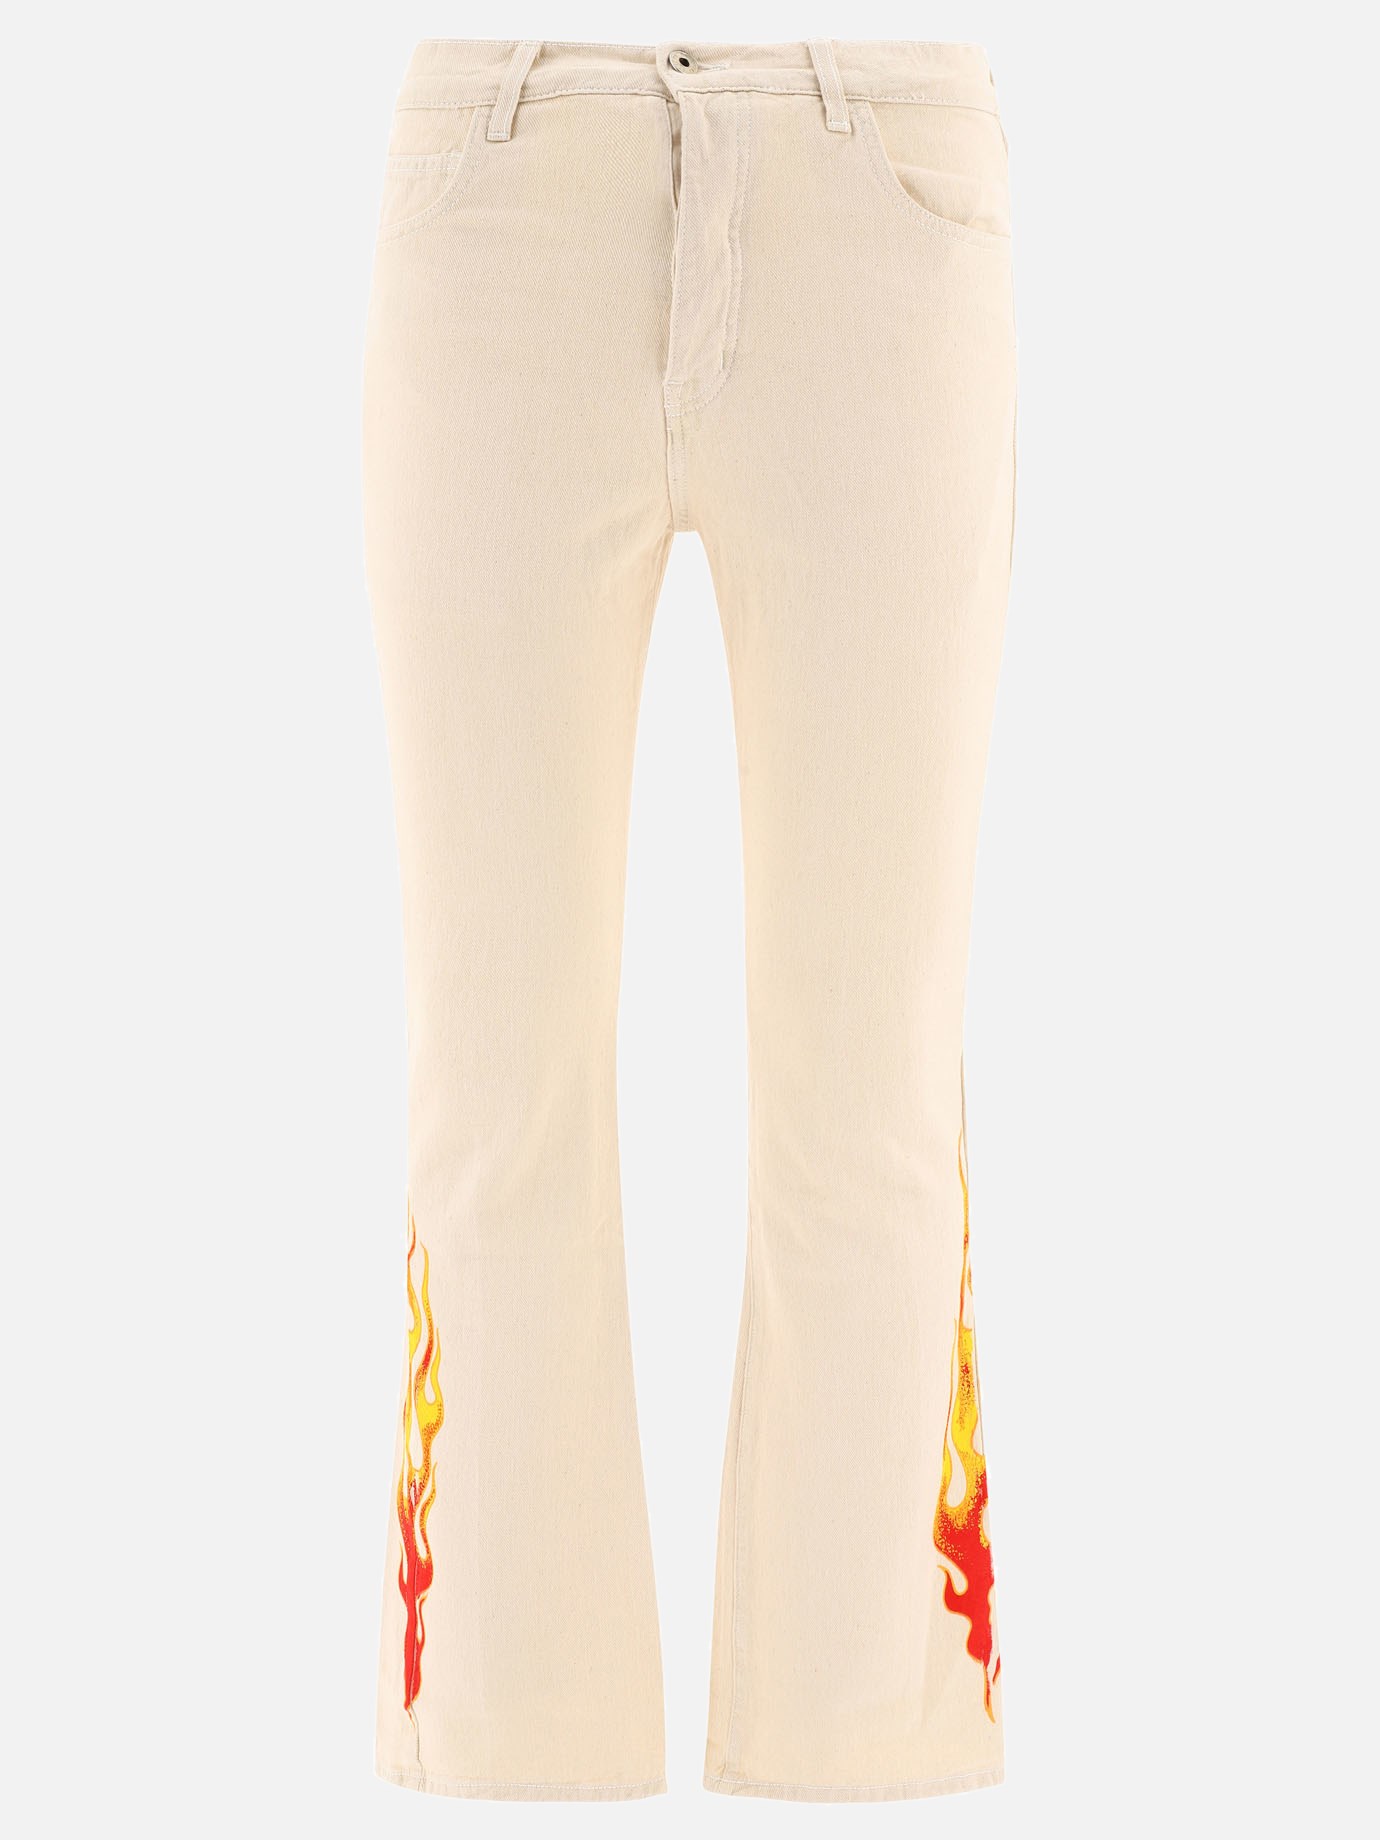 Jeans  Logan Flames by Gallery Dept. - 0